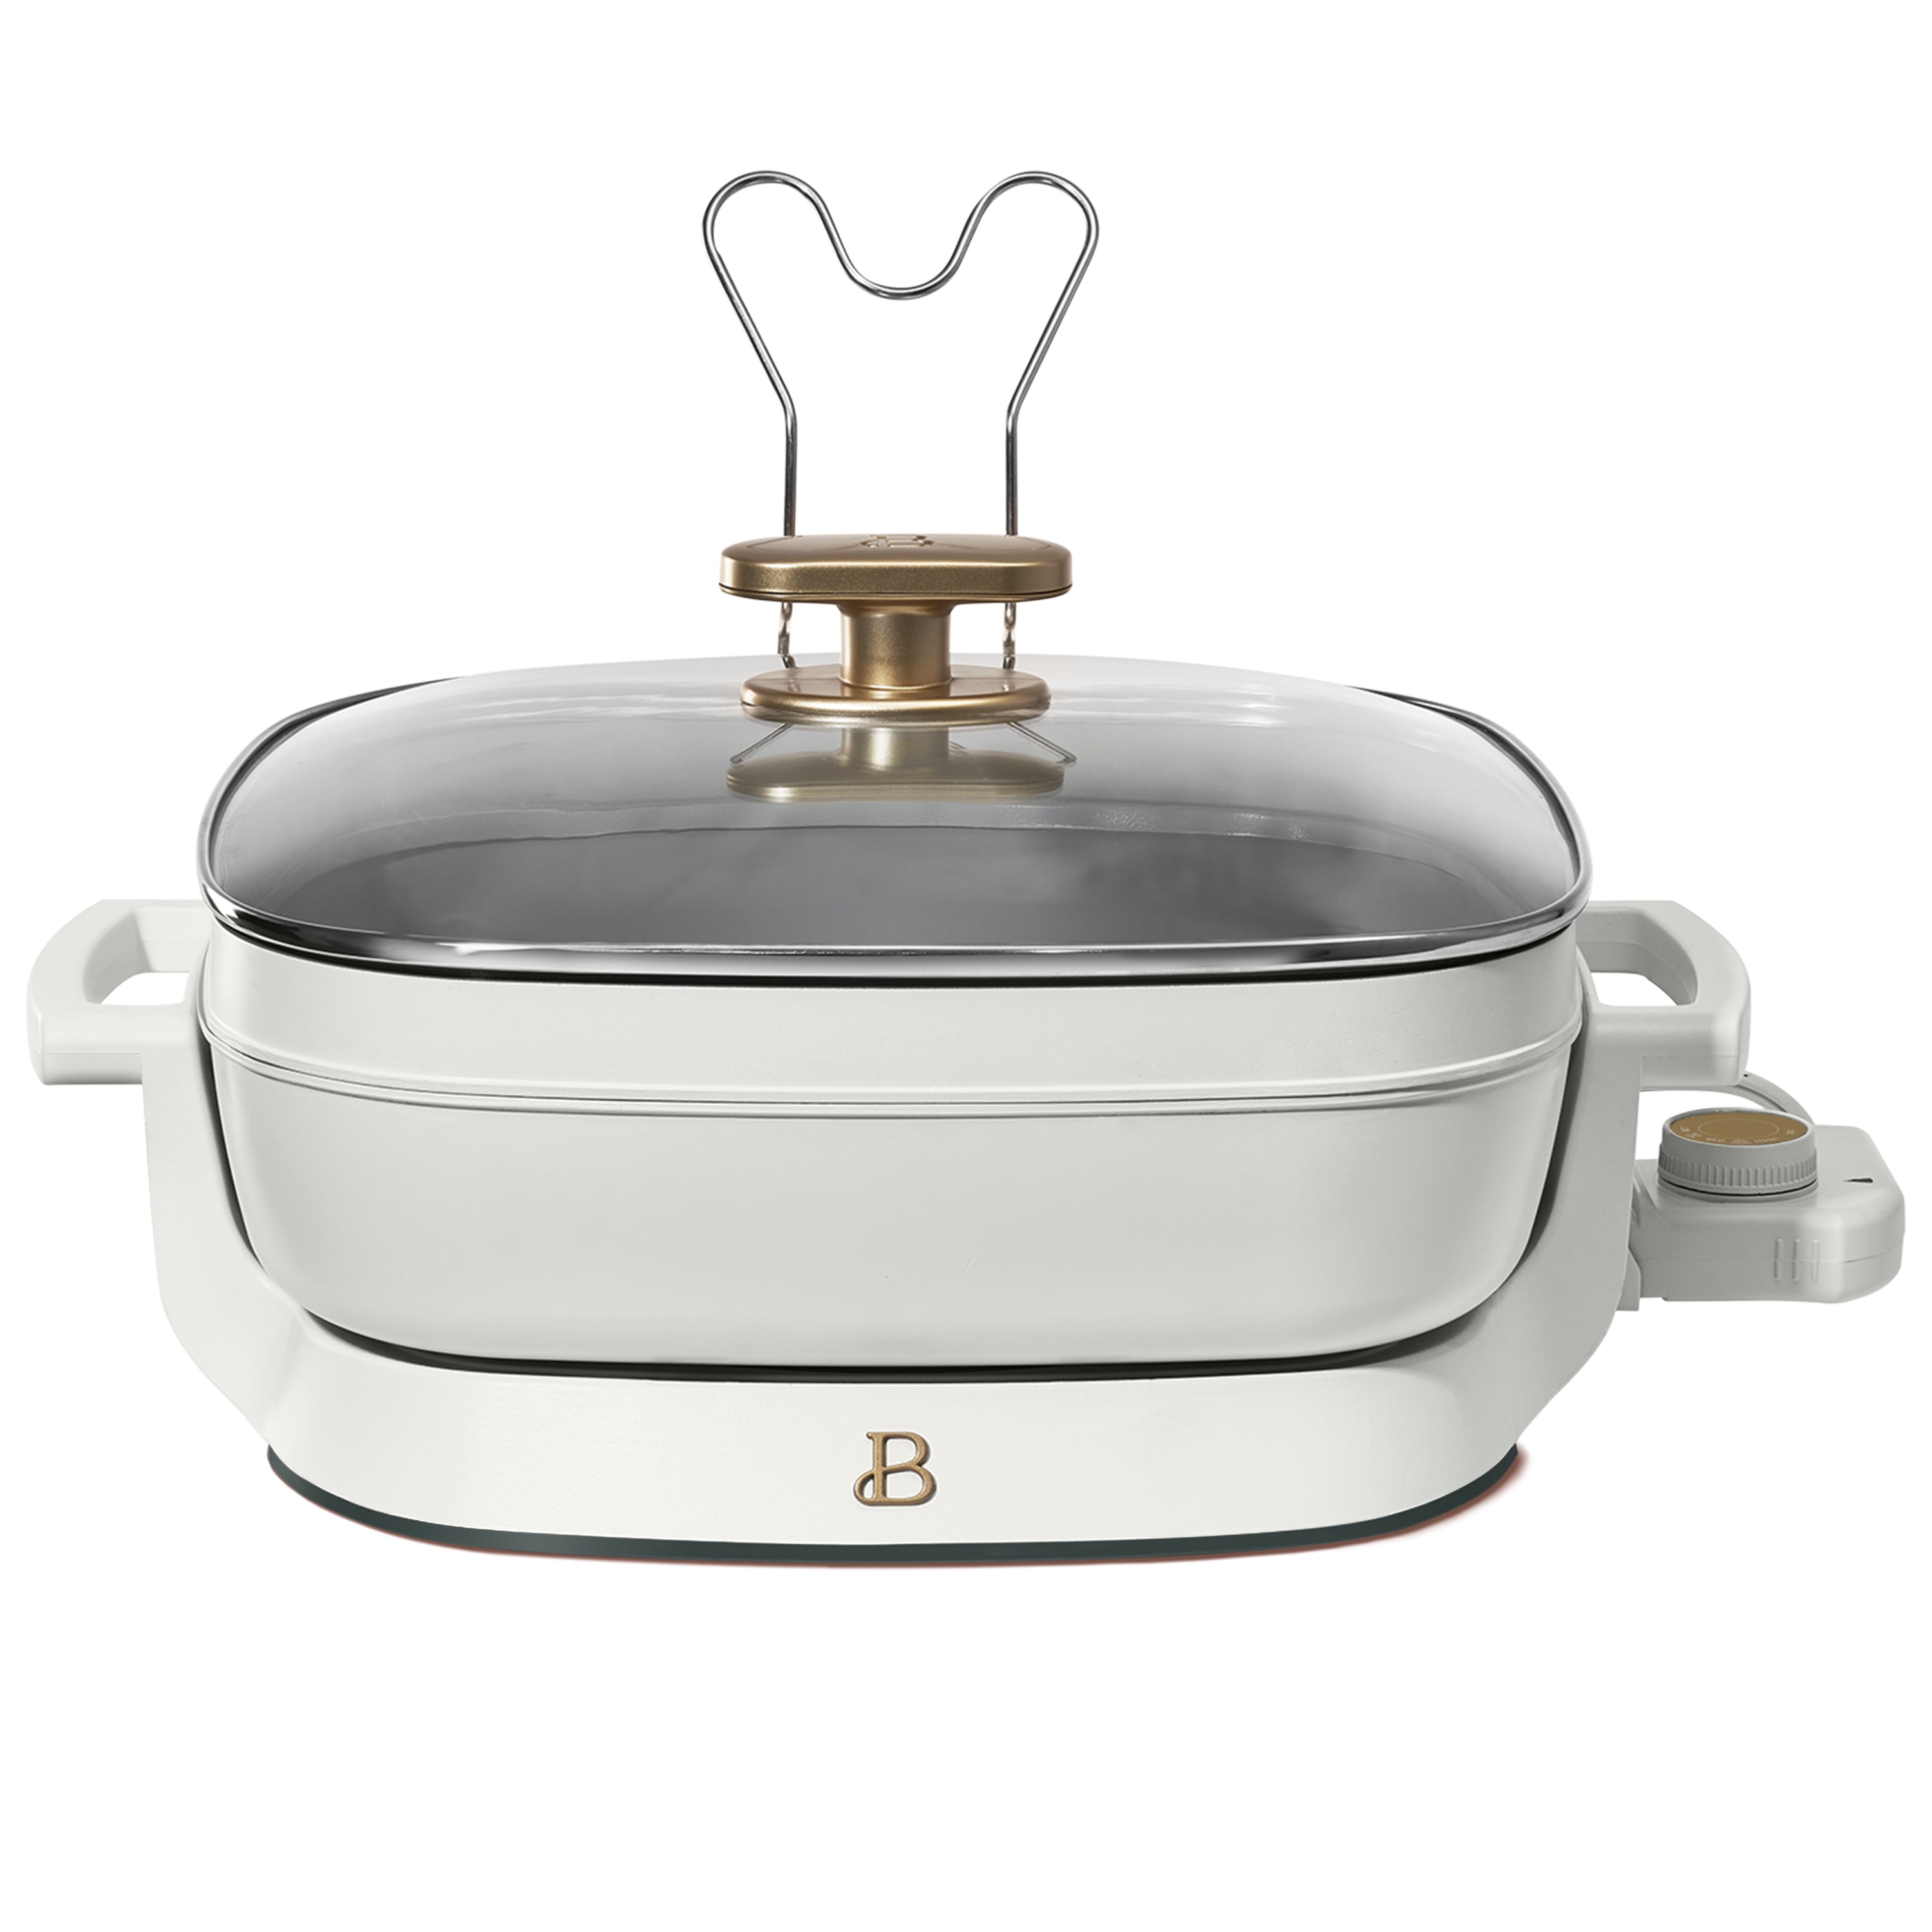 Beautiful 5-in-1 Electric Expandable Skillet, White Icing by Drew Barrymore, Up to 7 QT - Walmart.com